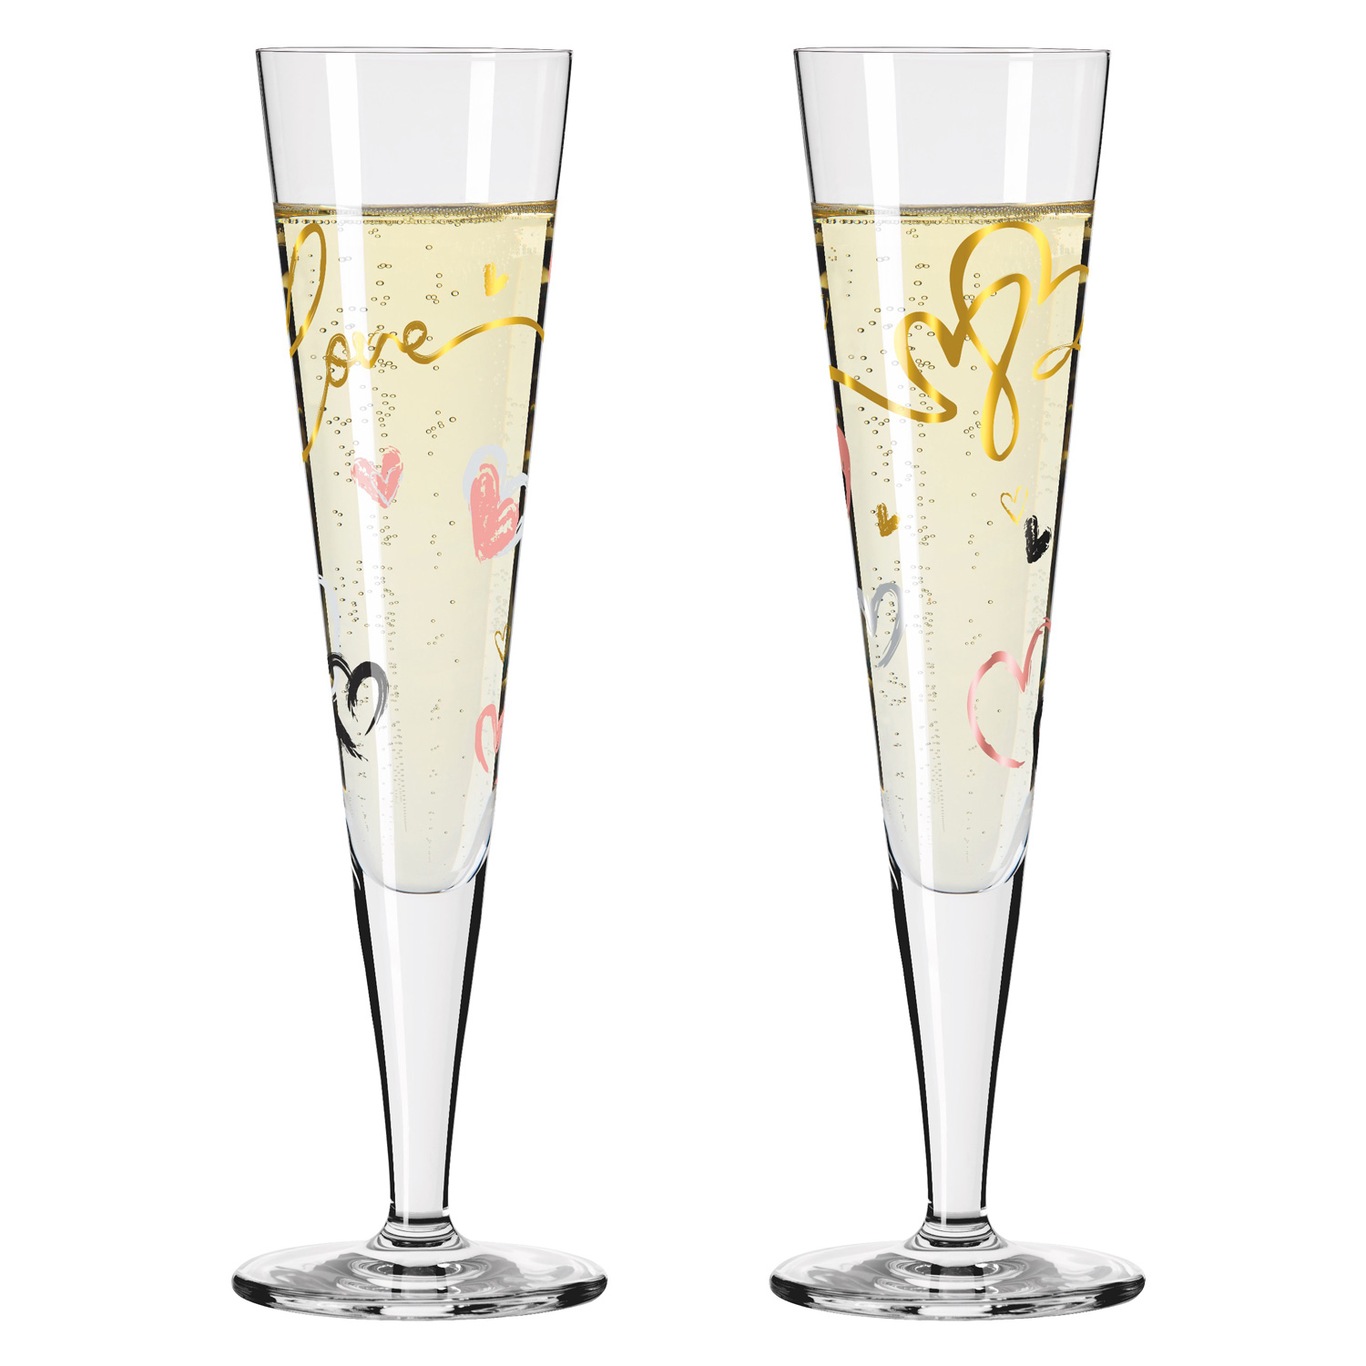 Goldnacht Champagneglas 2-pack, 2023